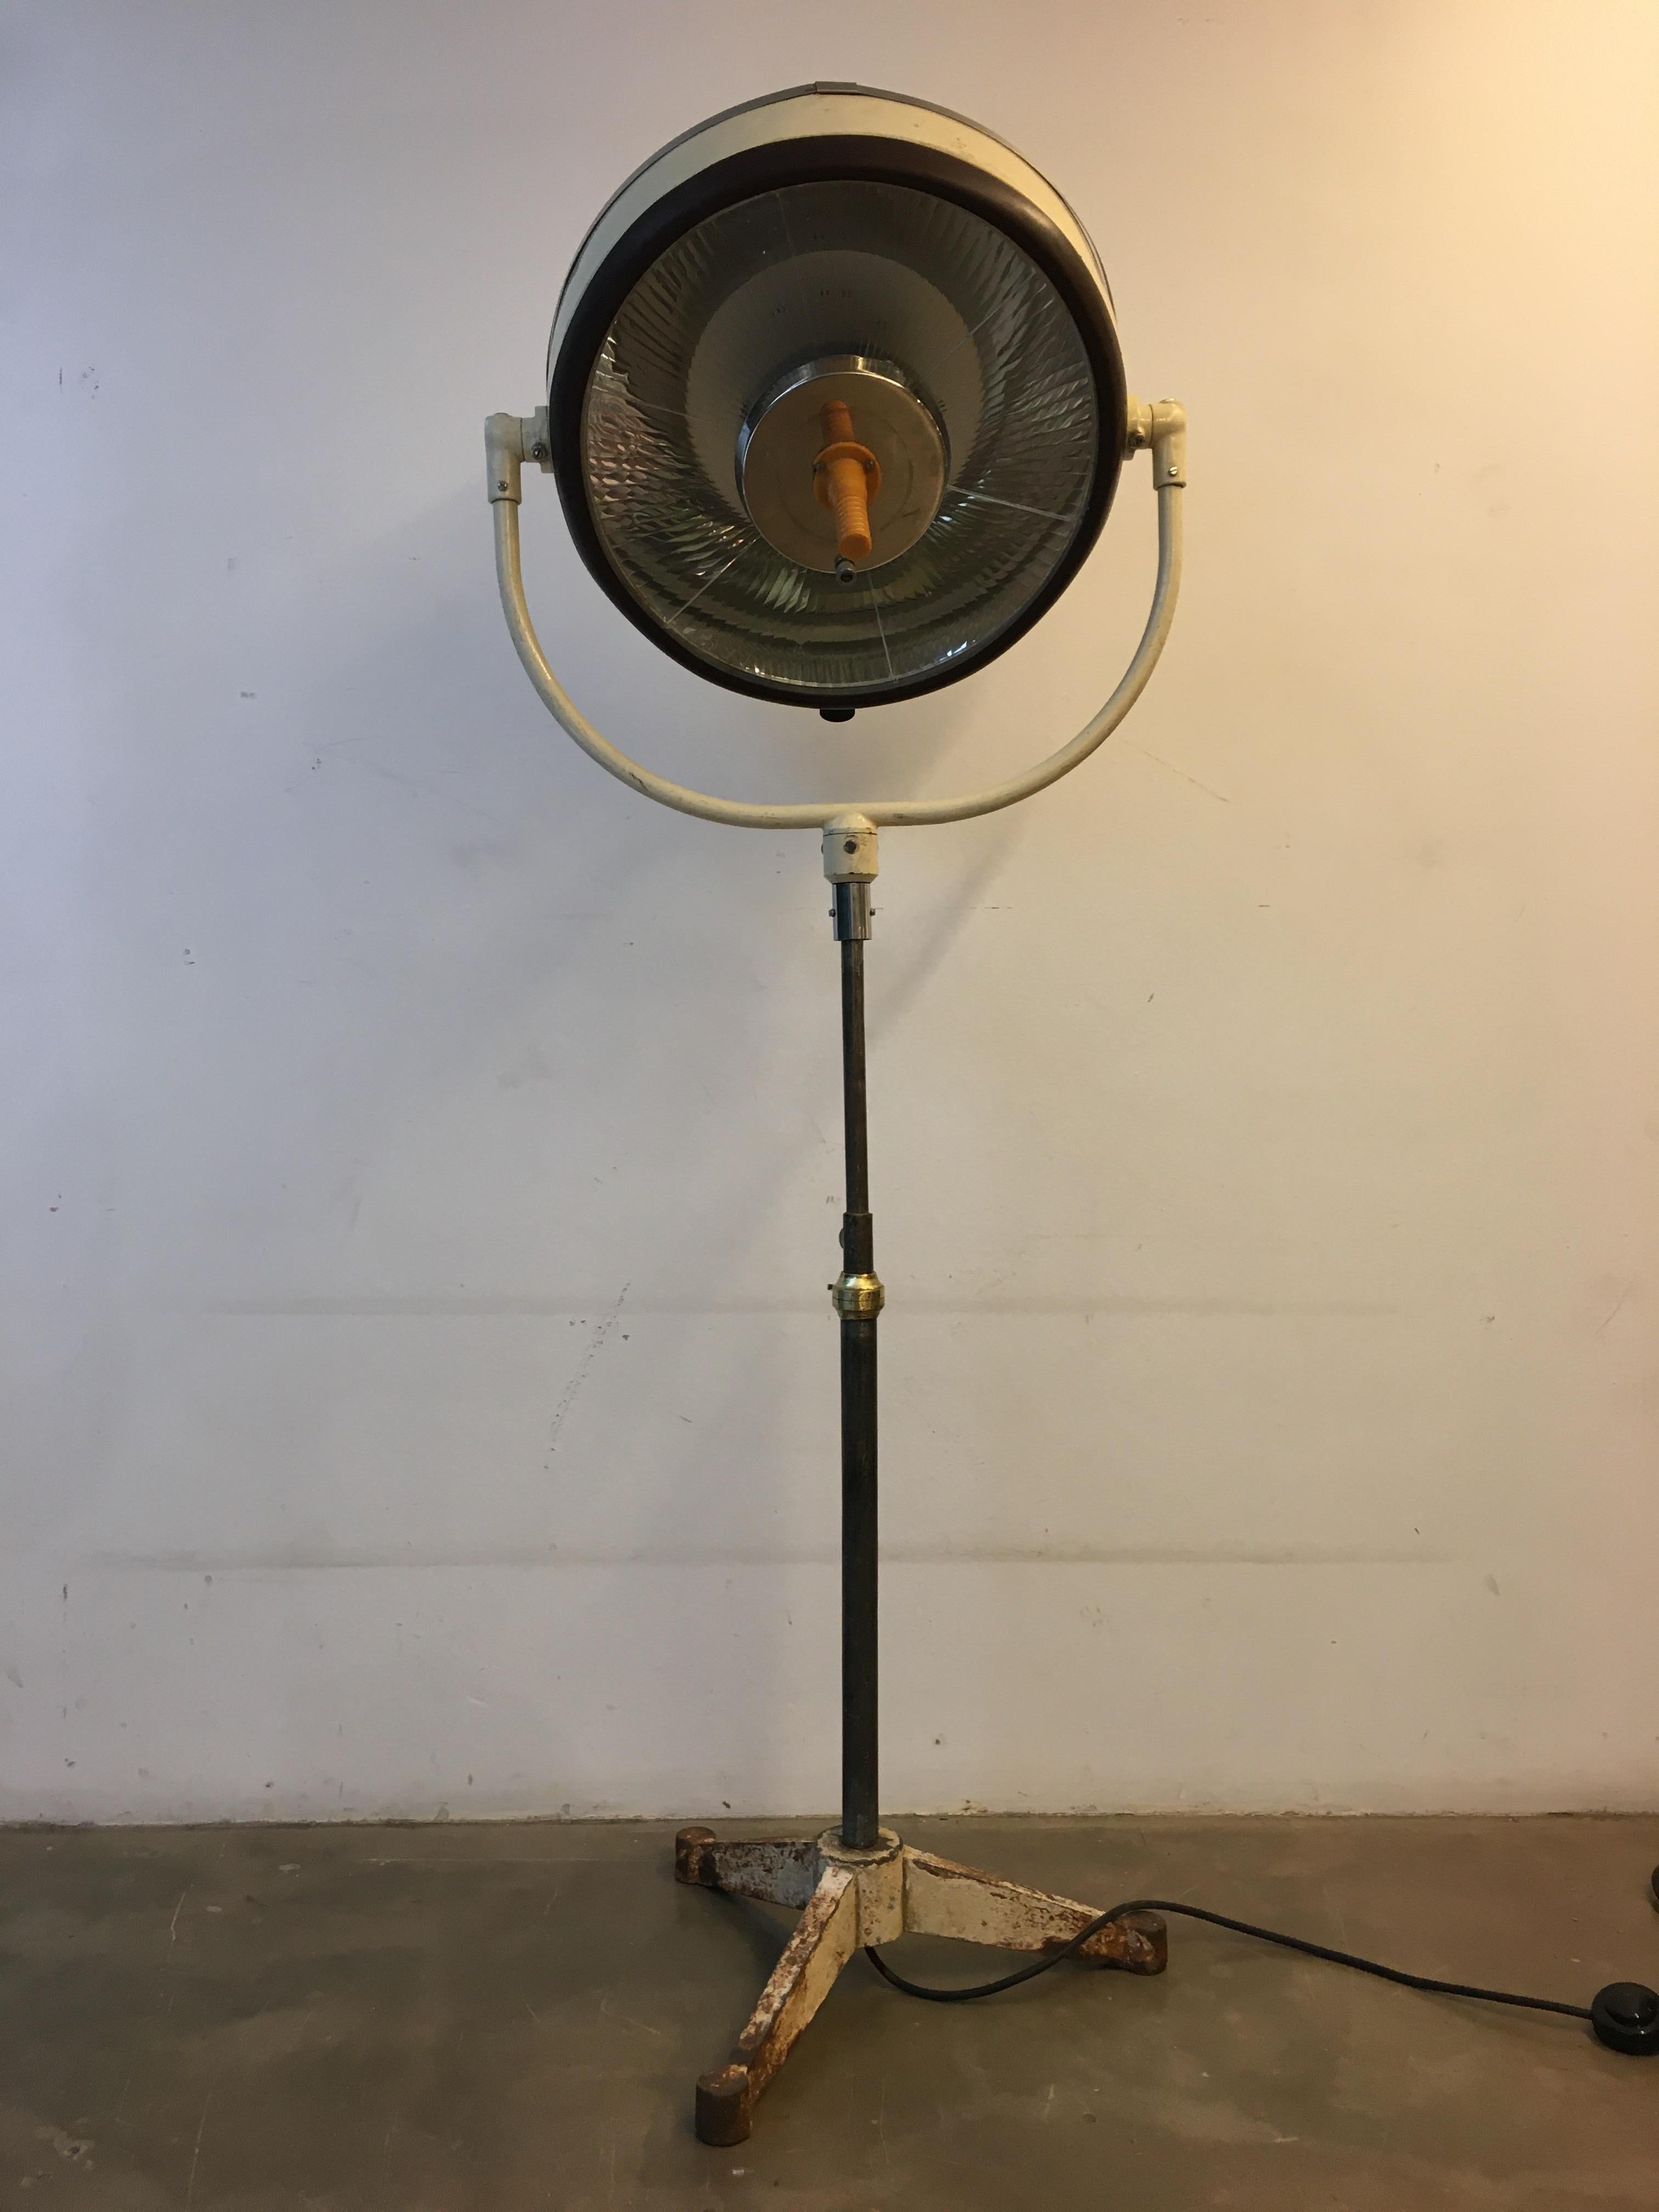 This impressive French surgical lamp dates to the 1950s and is in exceptional working order. It has been rewired to accommodate less powerful lights. The entire lamp housing can be raised or lowered by use of the crank.